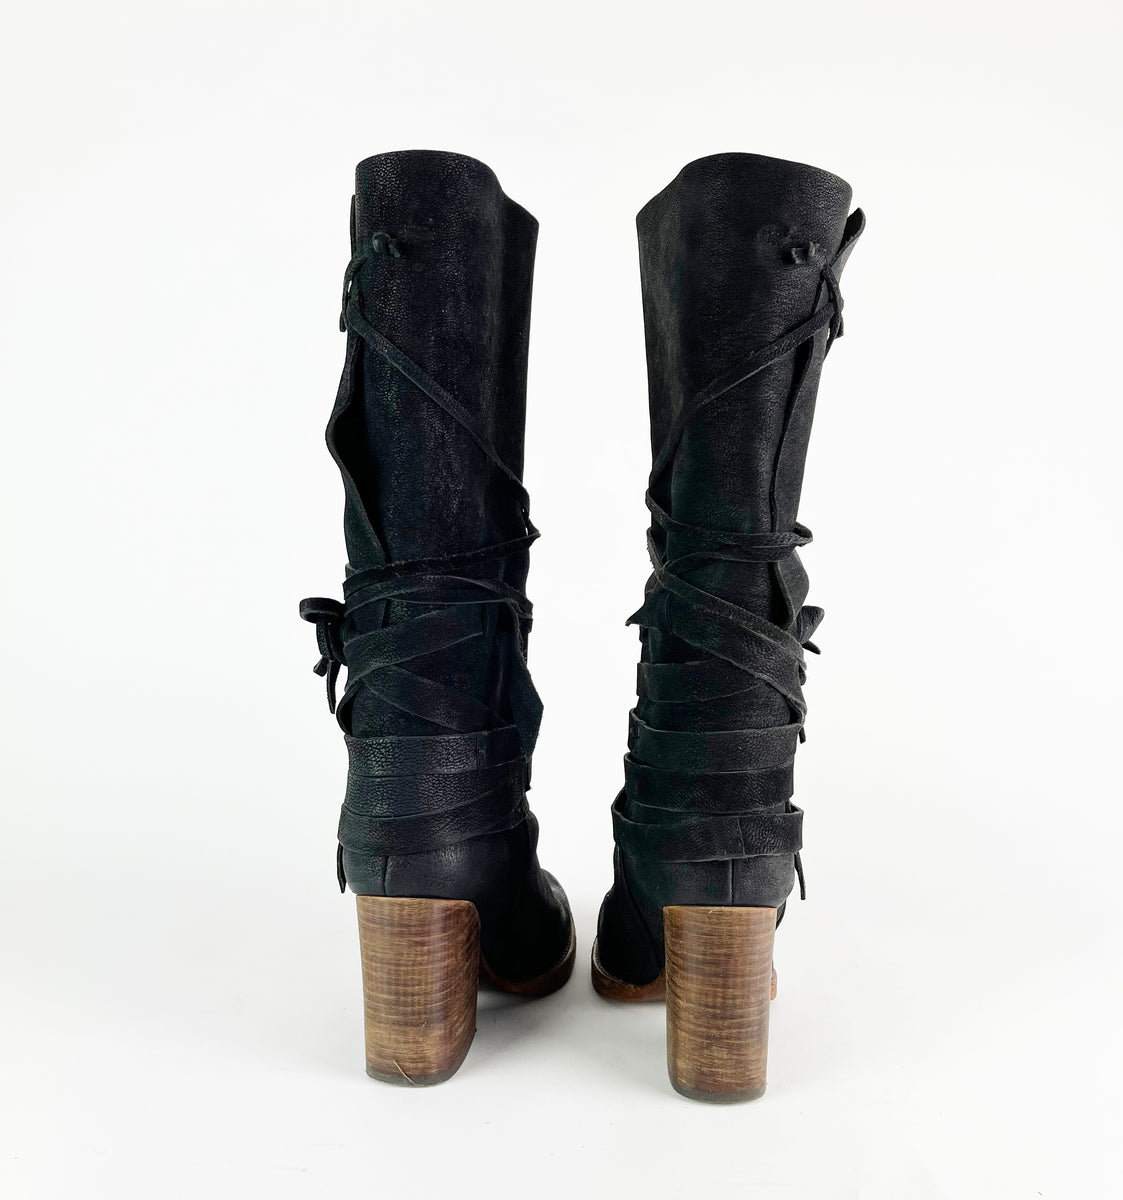 Free People We The Free Wade Distressed Ankle Boots